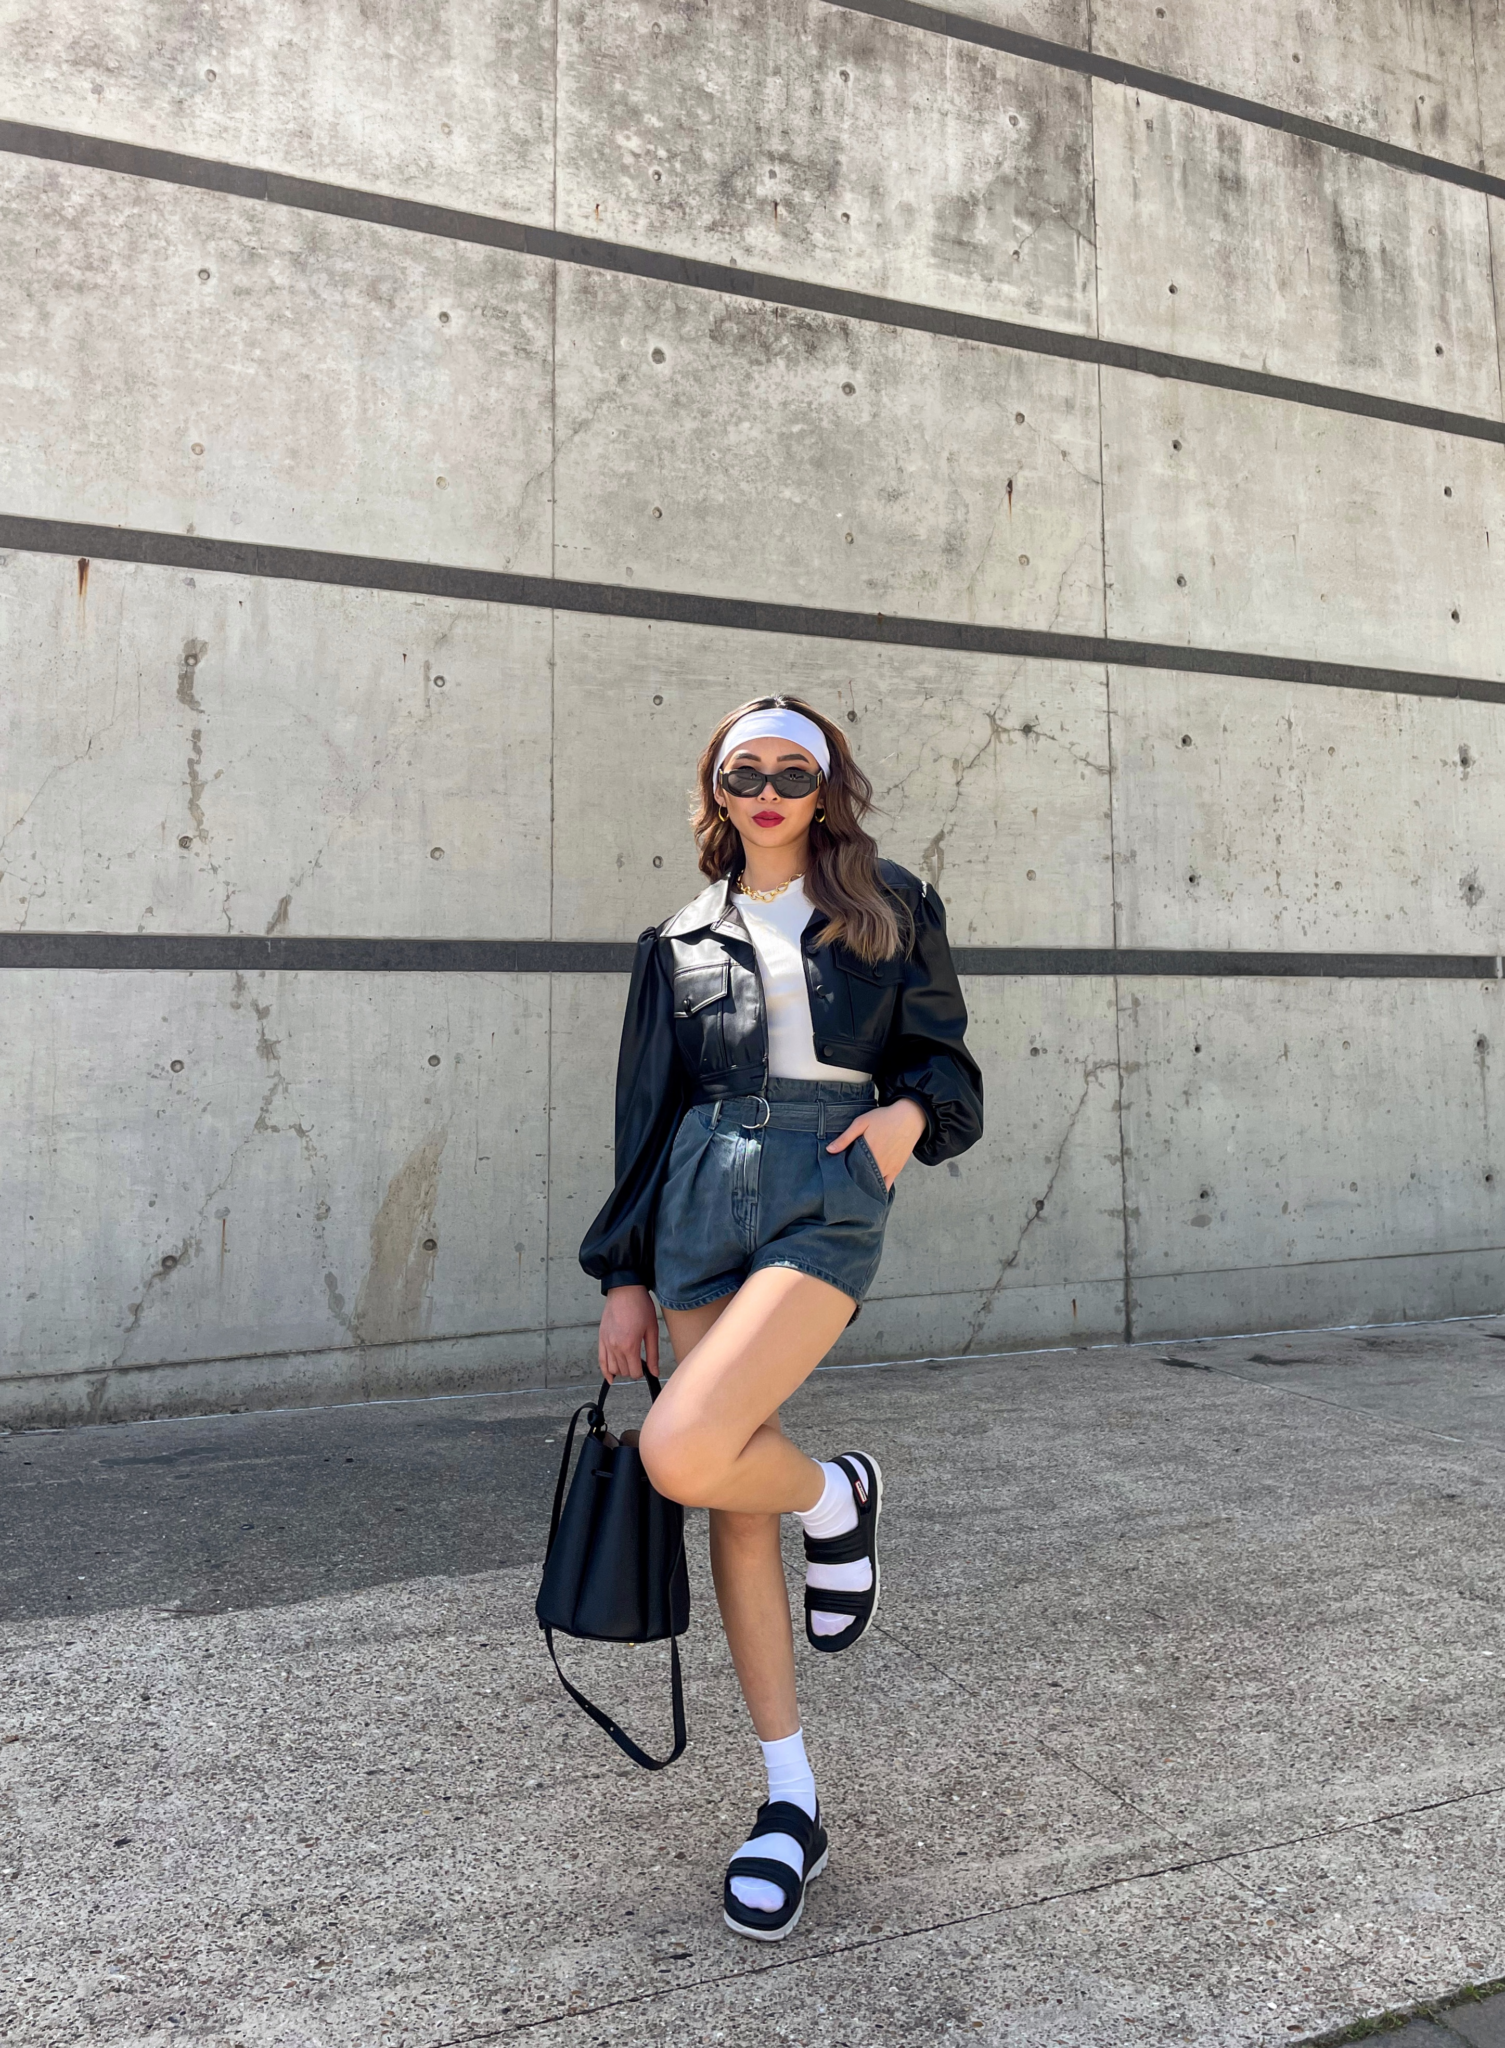 A trendy micro-influencer from the fashion industry, wearing a black jacket and shorts, striking a pose in front of a wall.